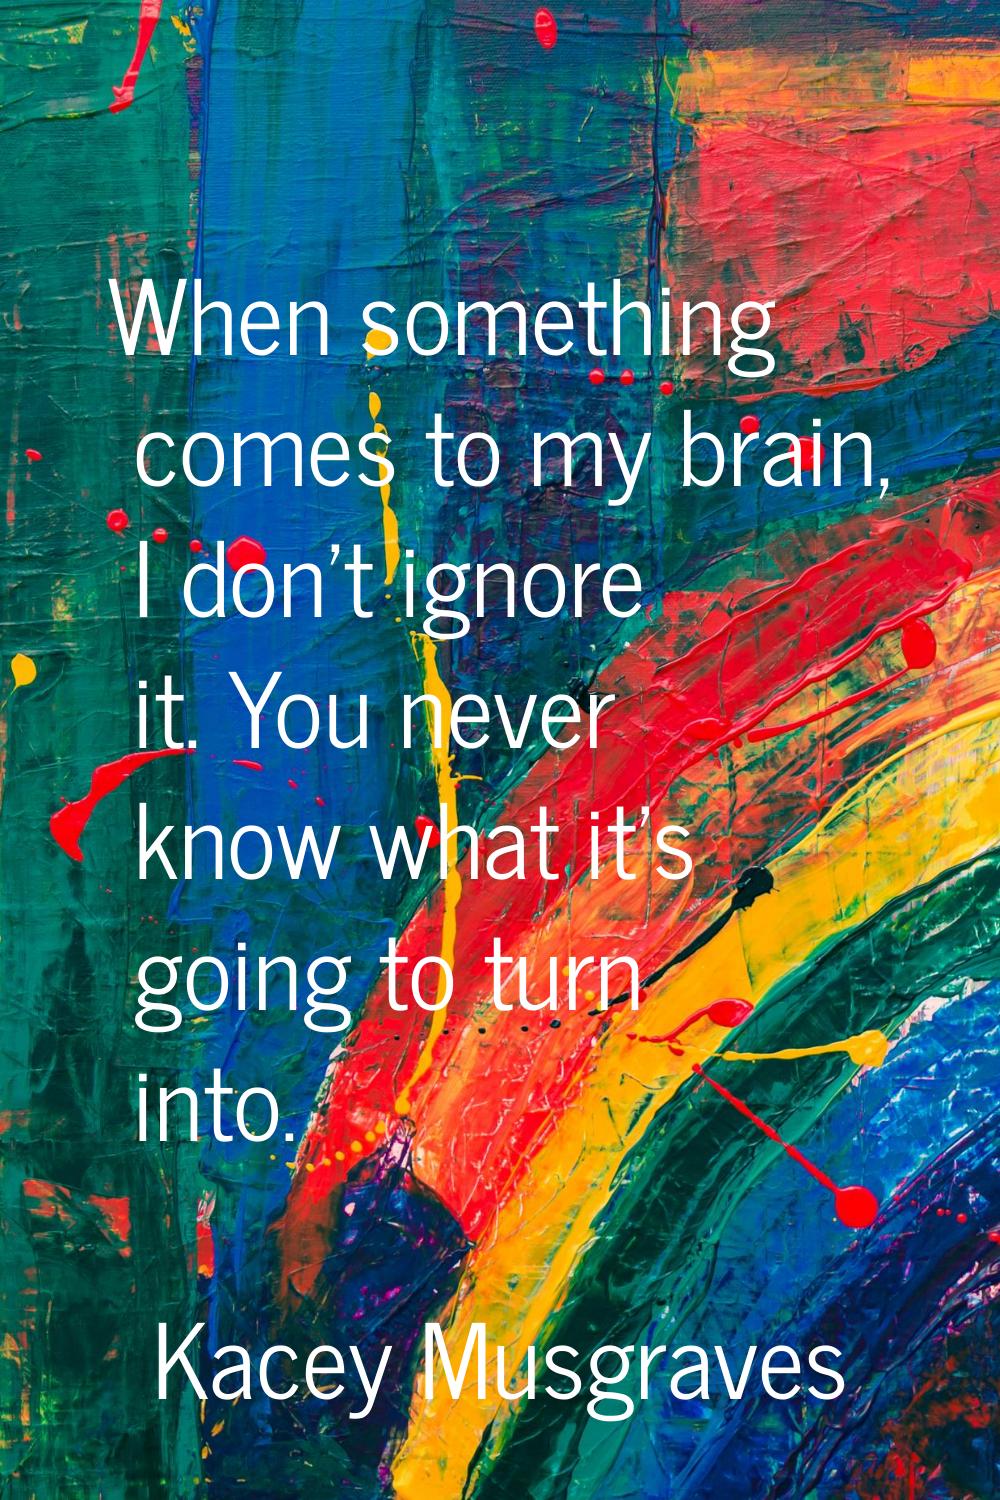 When something comes to my brain, I don't ignore it. You never know what it's going to turn into.